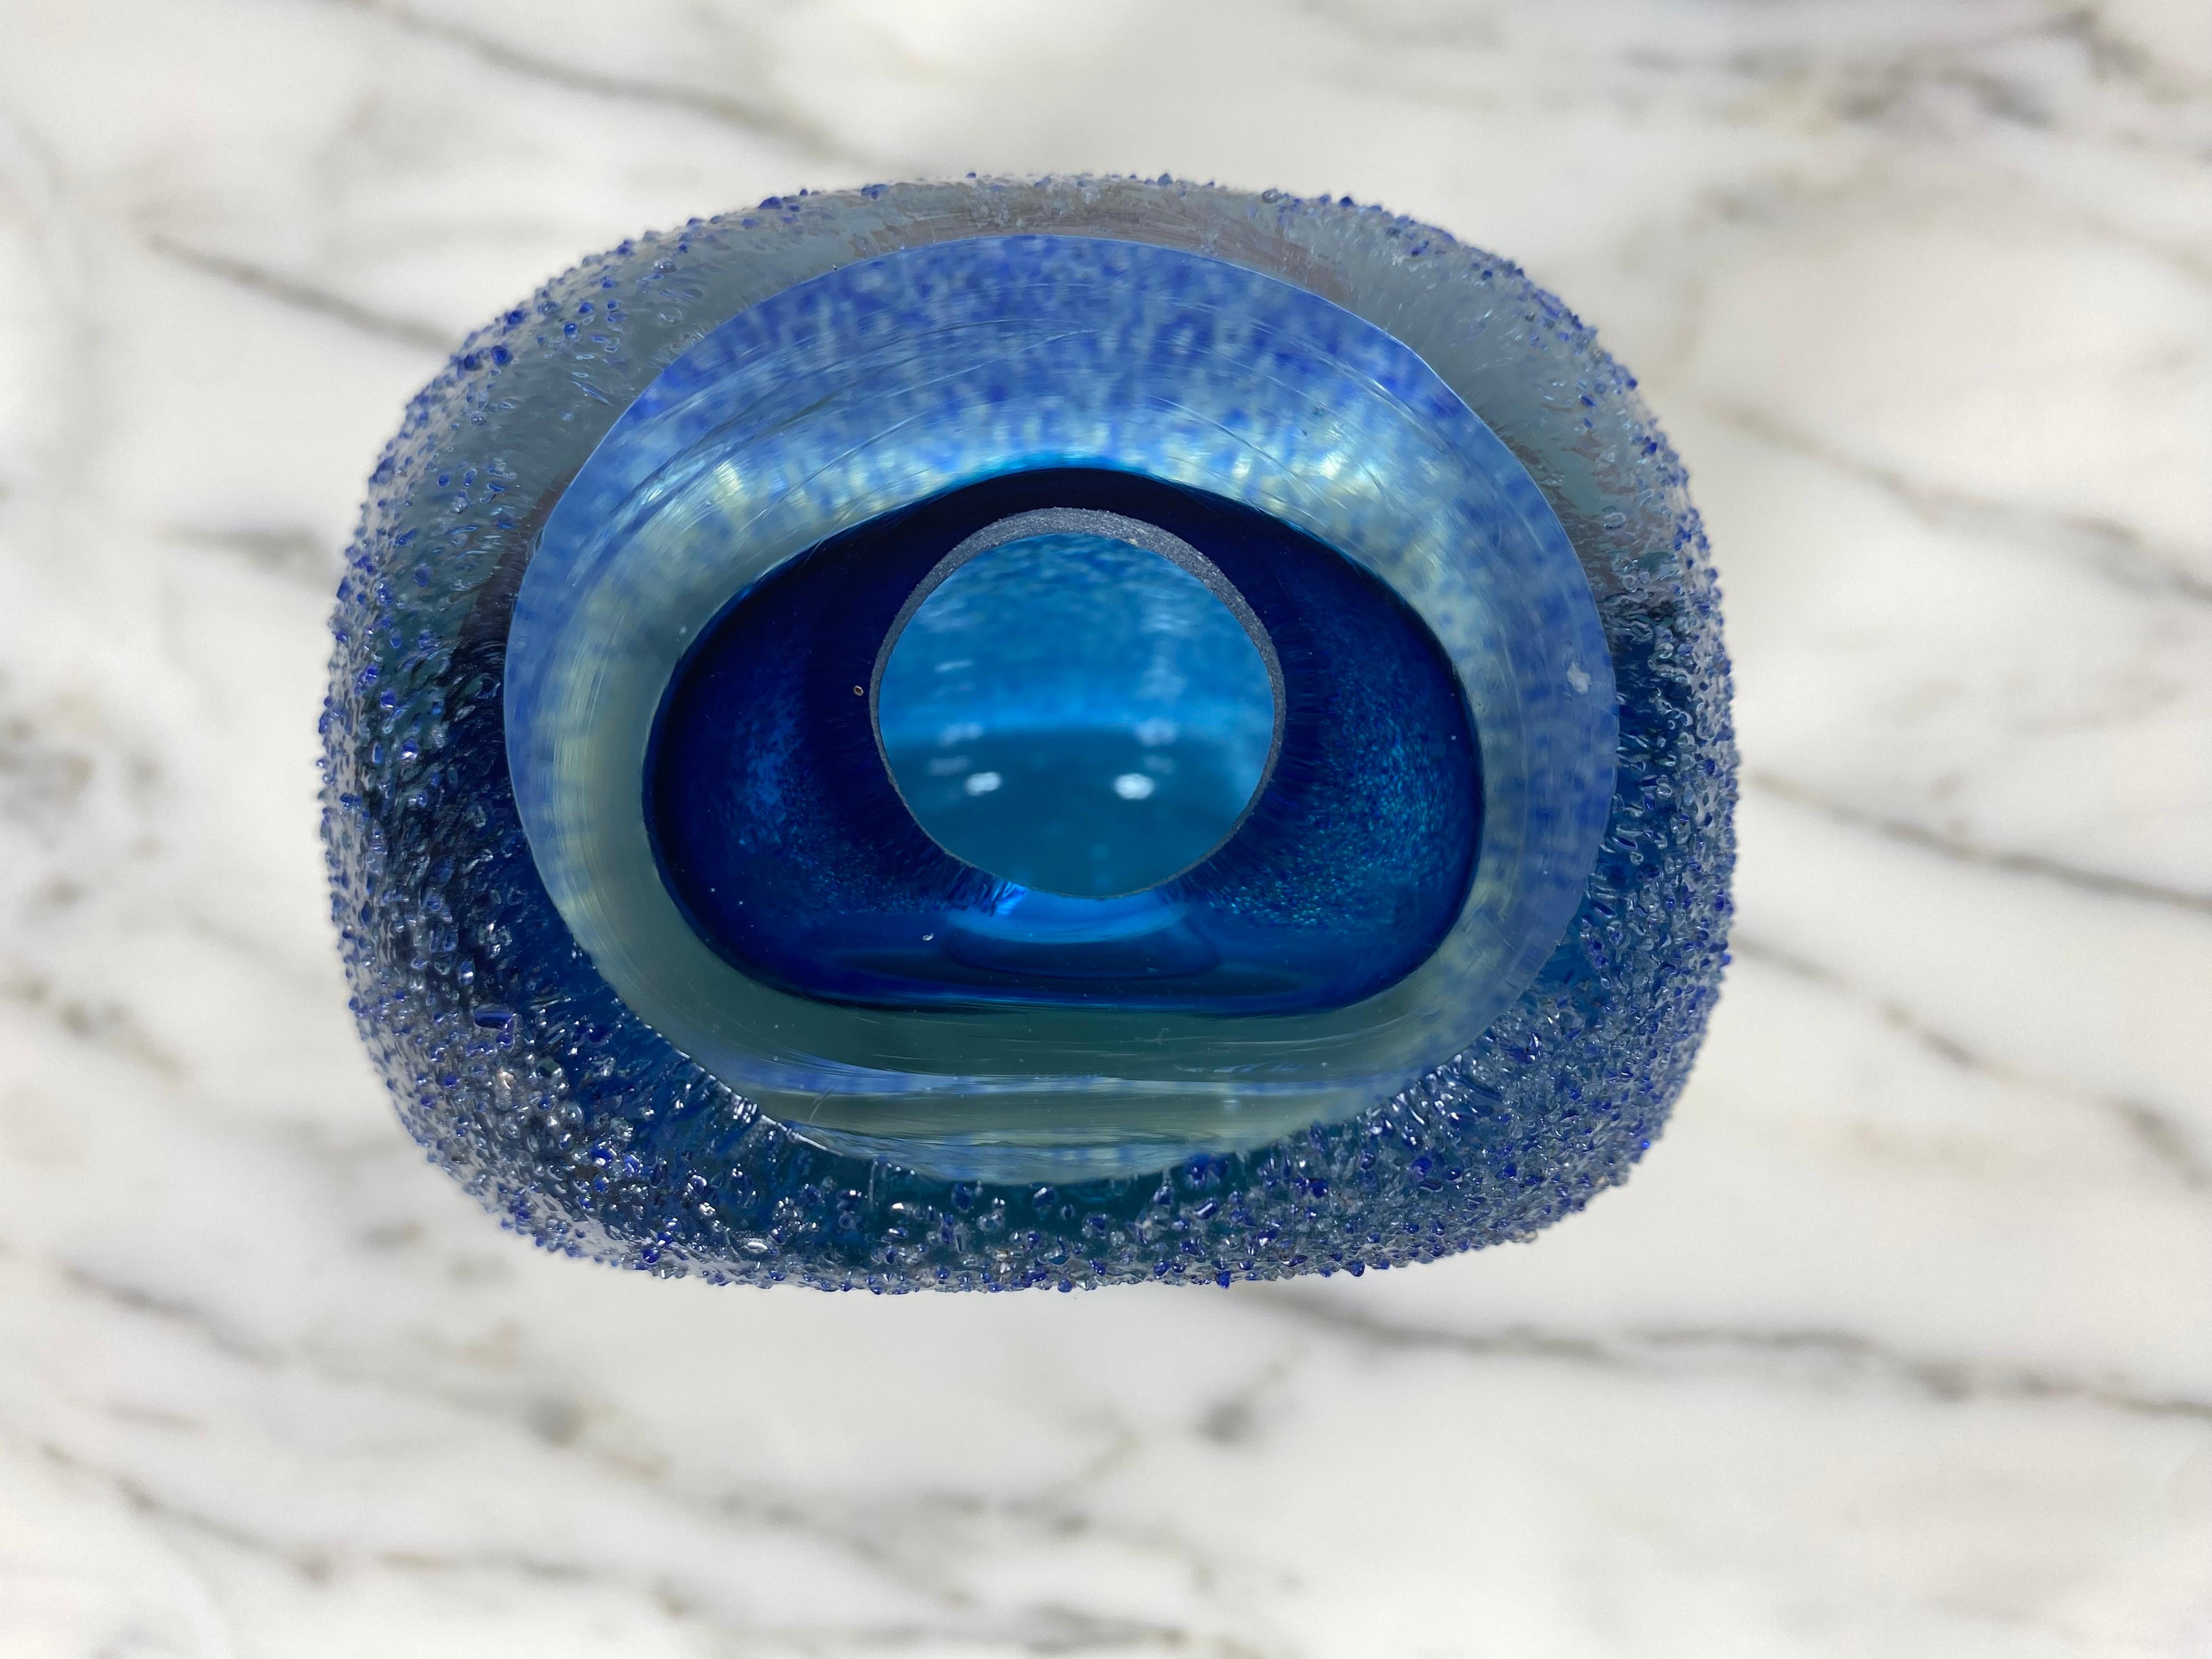 Mid-20th Century Murano Sommerso Cobalt and Azure BlueTextured Glass Vase For Sale